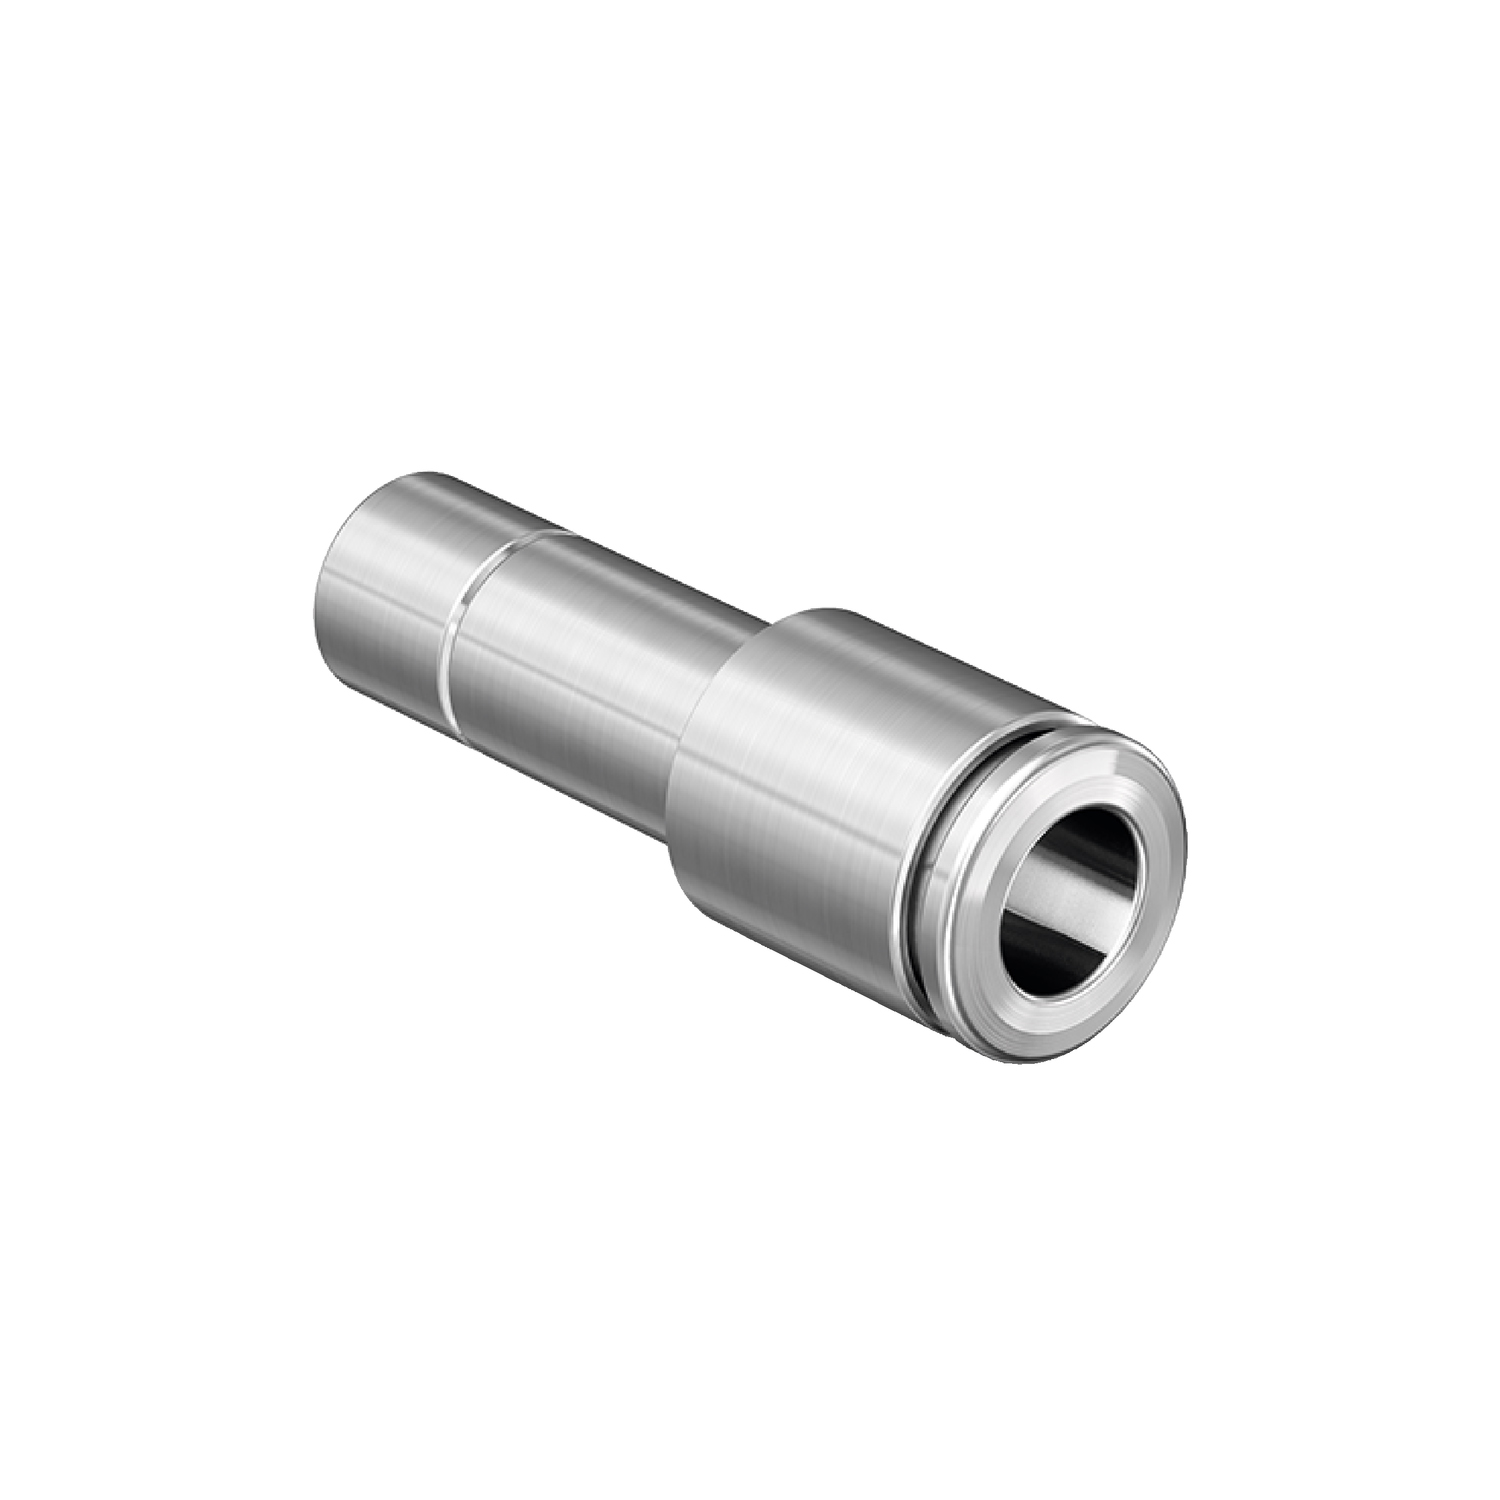 Connector for Lubricator, TUBEFIT Series